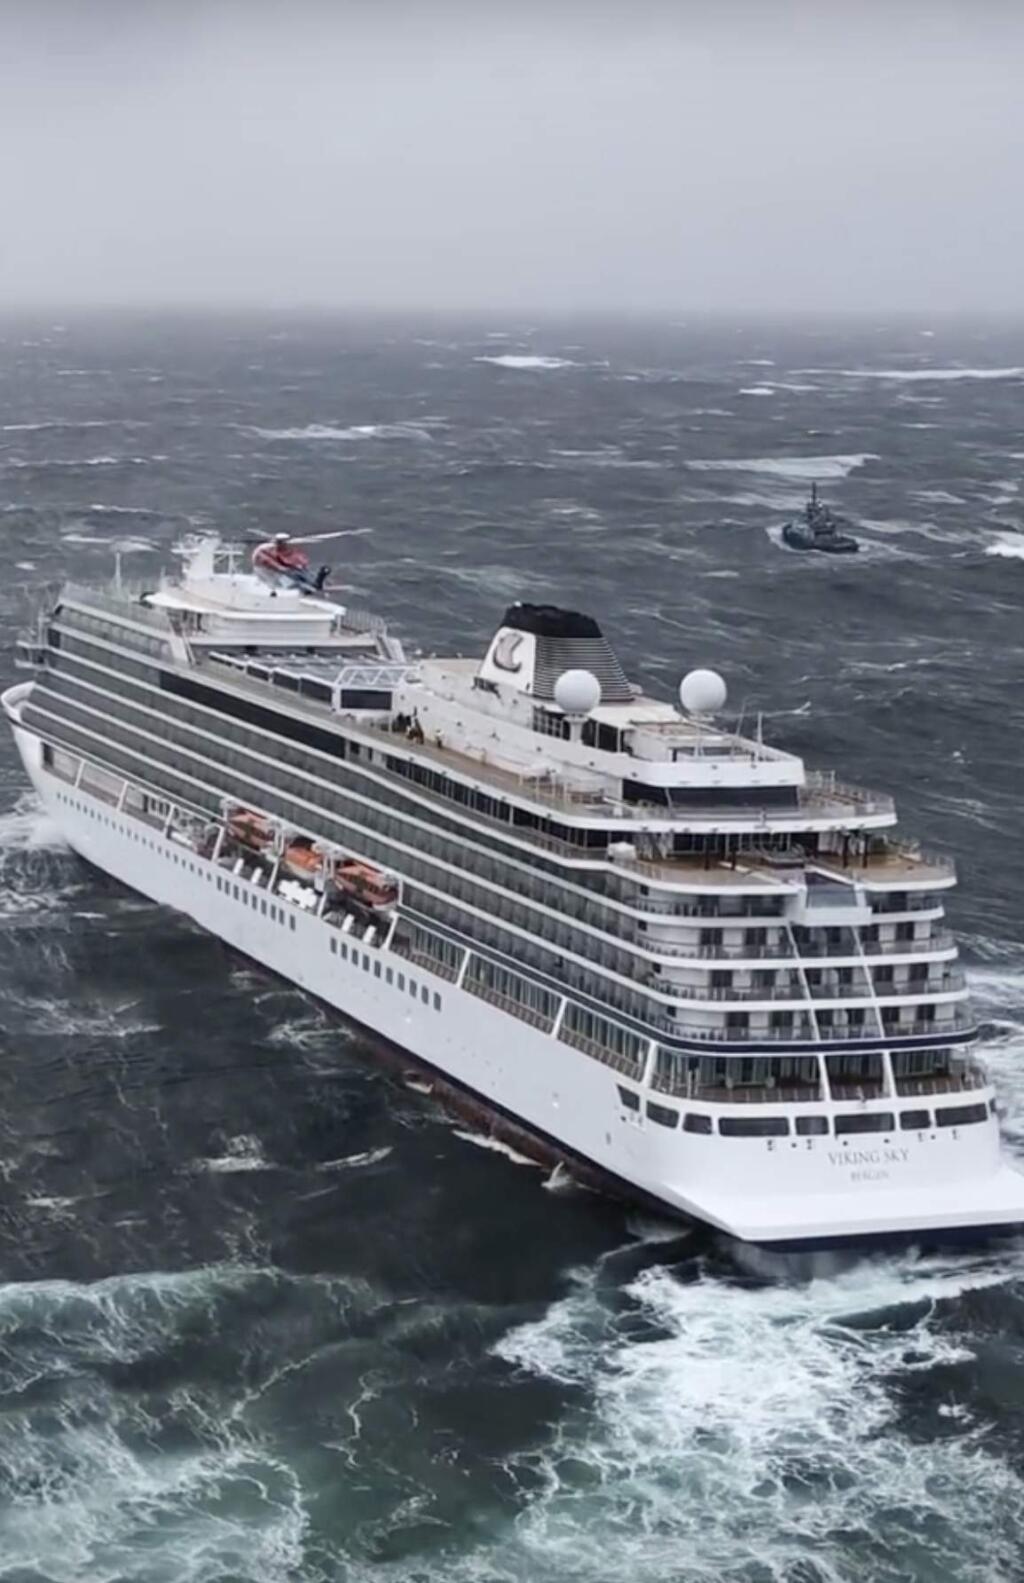 In this image taken from video made available by CHC helicopters, helicopters fly over the cruise ship Viking Sky after it sent out a Mayday signal because of engine failure in windy conditions off the west coast of Norway, Saturday March 23, 2019. A cruise ship with engine problems sent a mayday call off Norway's western coast on Saturday, then began evacuating its 1,300 passengers and crew amid stormy seas and heavy winds in a high-risk helicopter rescue operation. (CHC helicopters via AP)